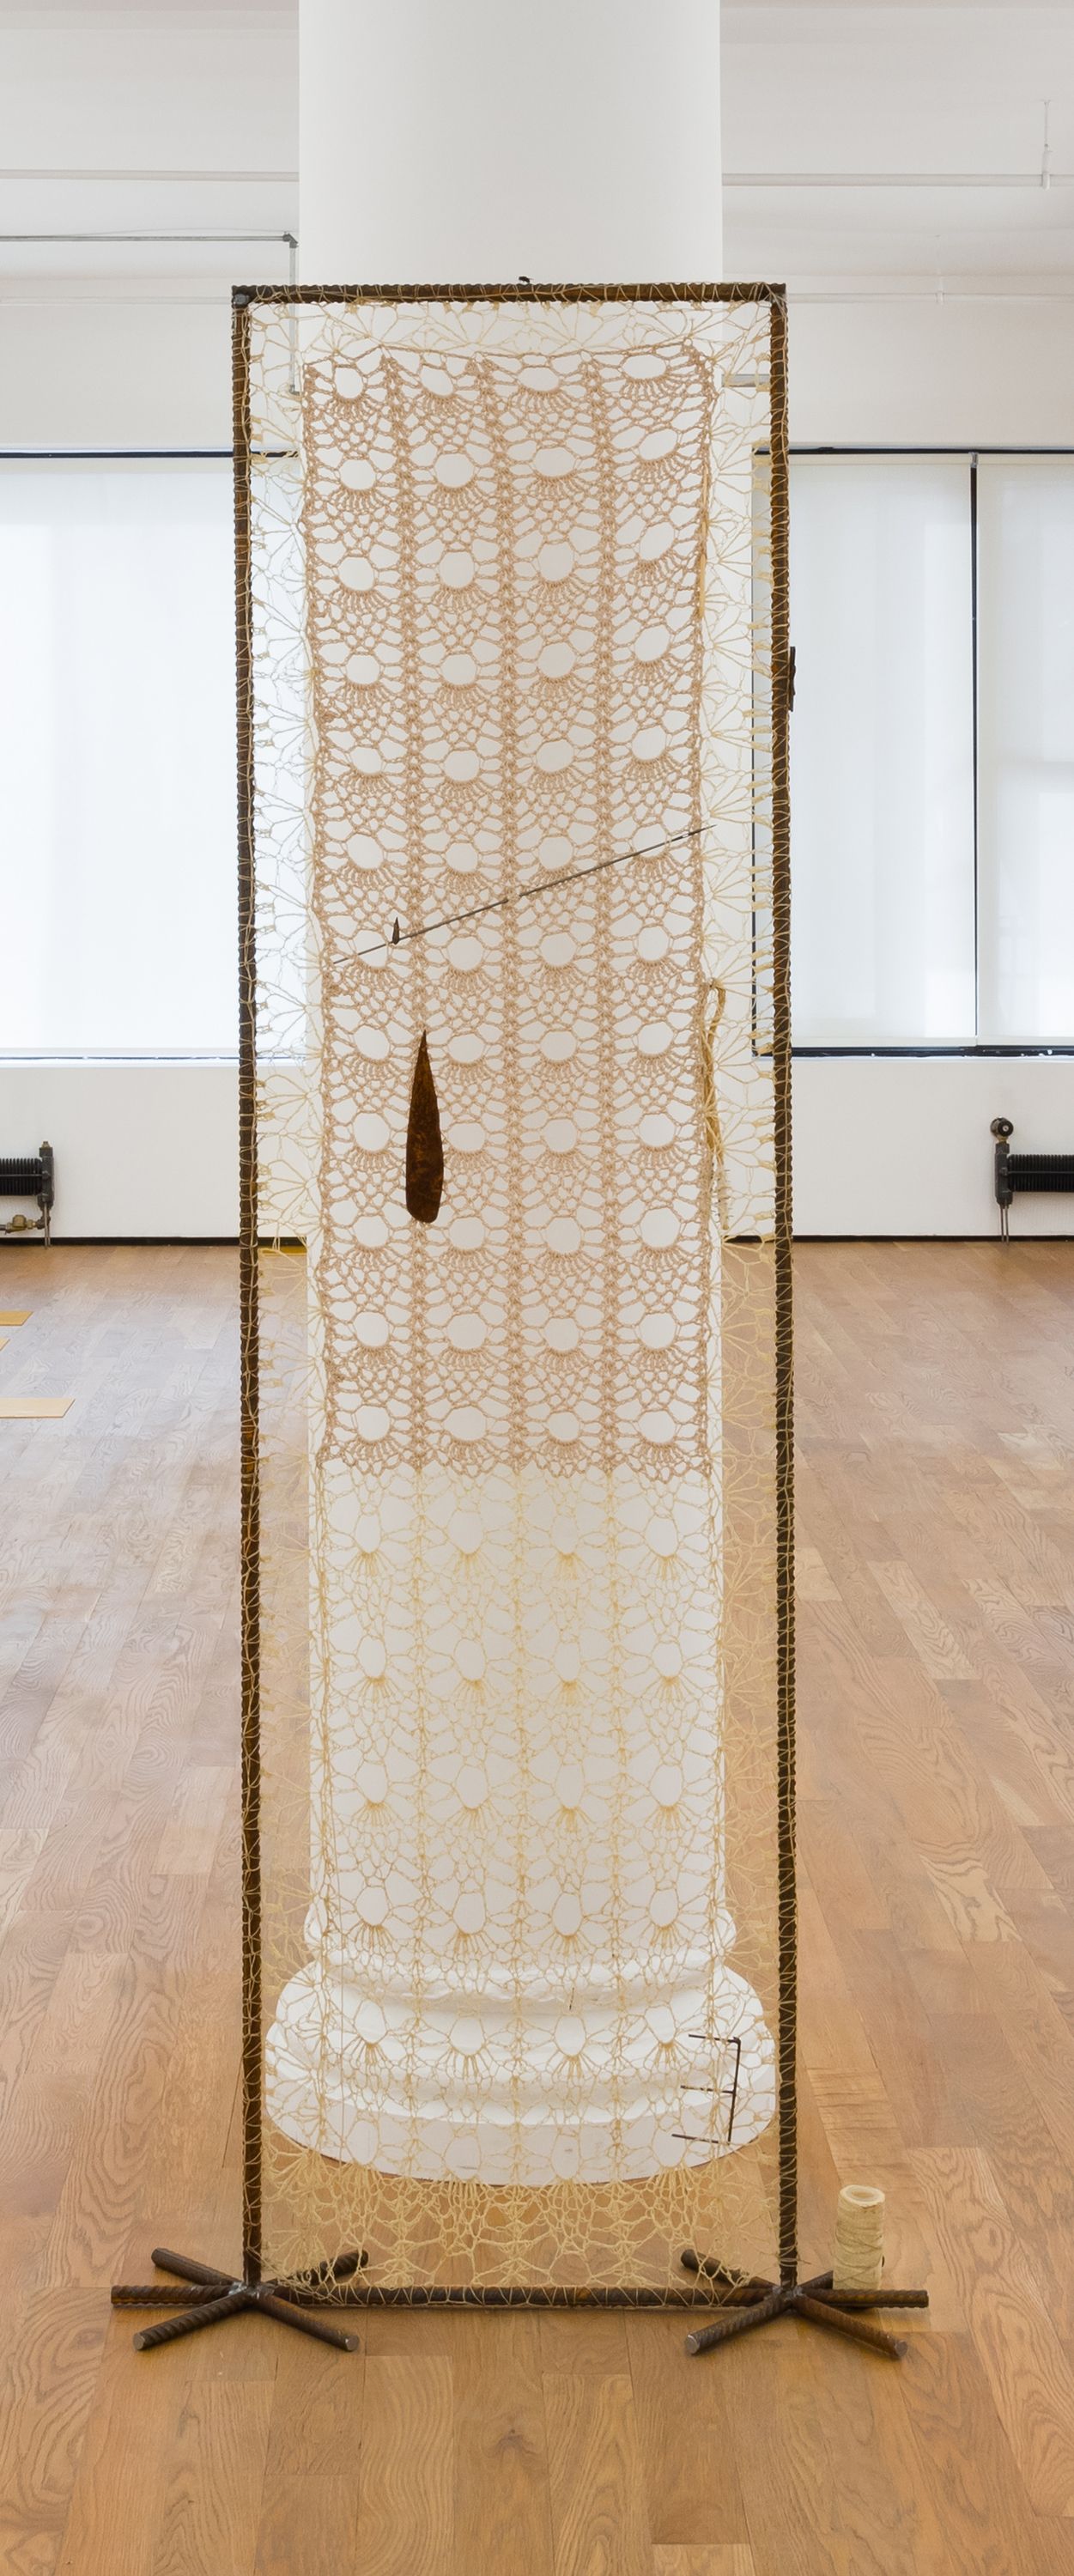 ektor garcia, teotihuacan, 2018, welded steel, waxed thread, cotton, bone crochet hook, upholstery needle, spur, welded frame, crochet white lace, and loose parts embedded attached to lace, 31 1/2 x 77 1/2 x 11 in. (80 x 196.8 x 27.9 cm)  